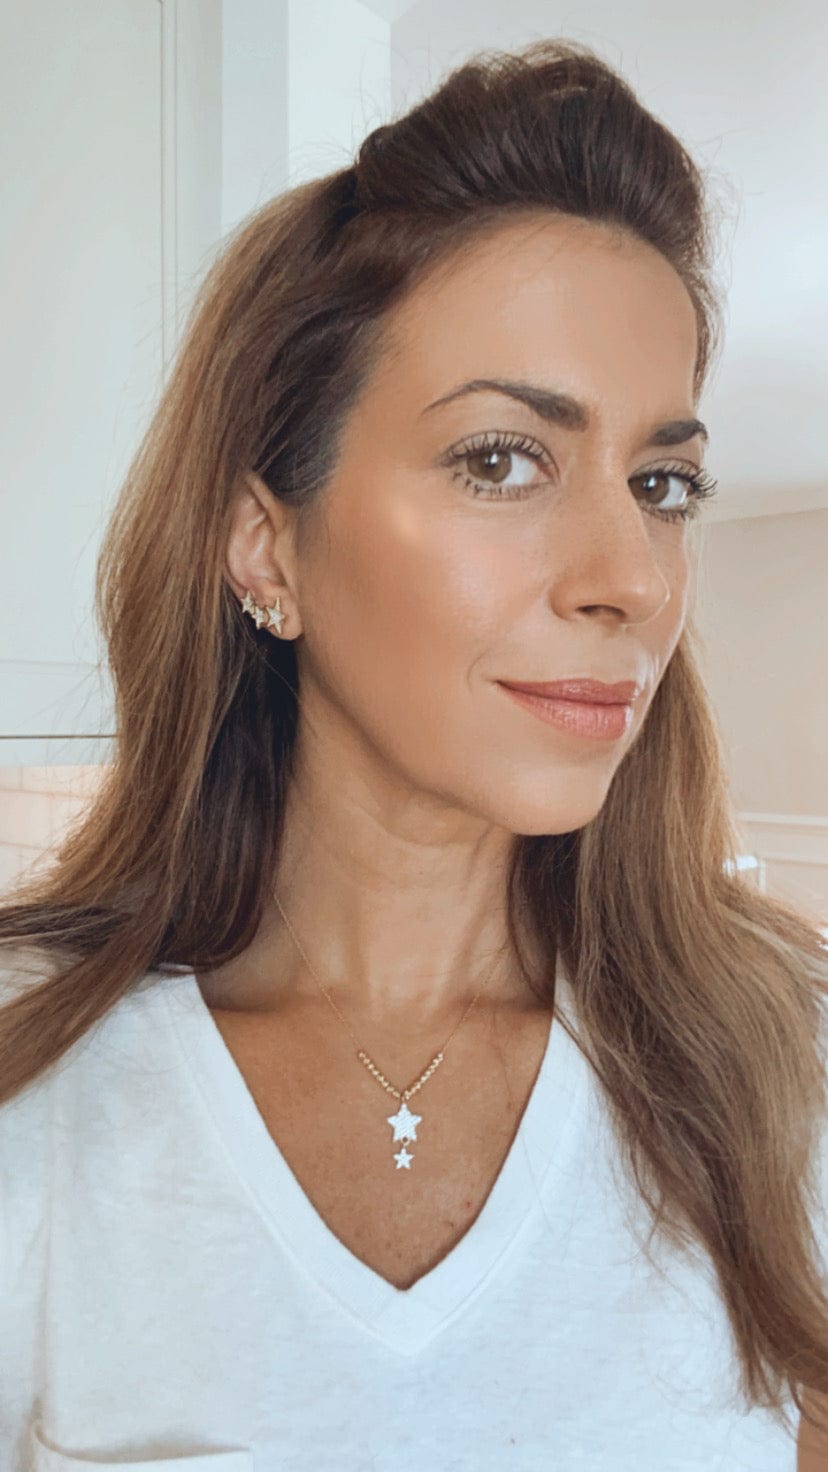 girl wearing a white t shirt and the star necklace along with star climber earrings